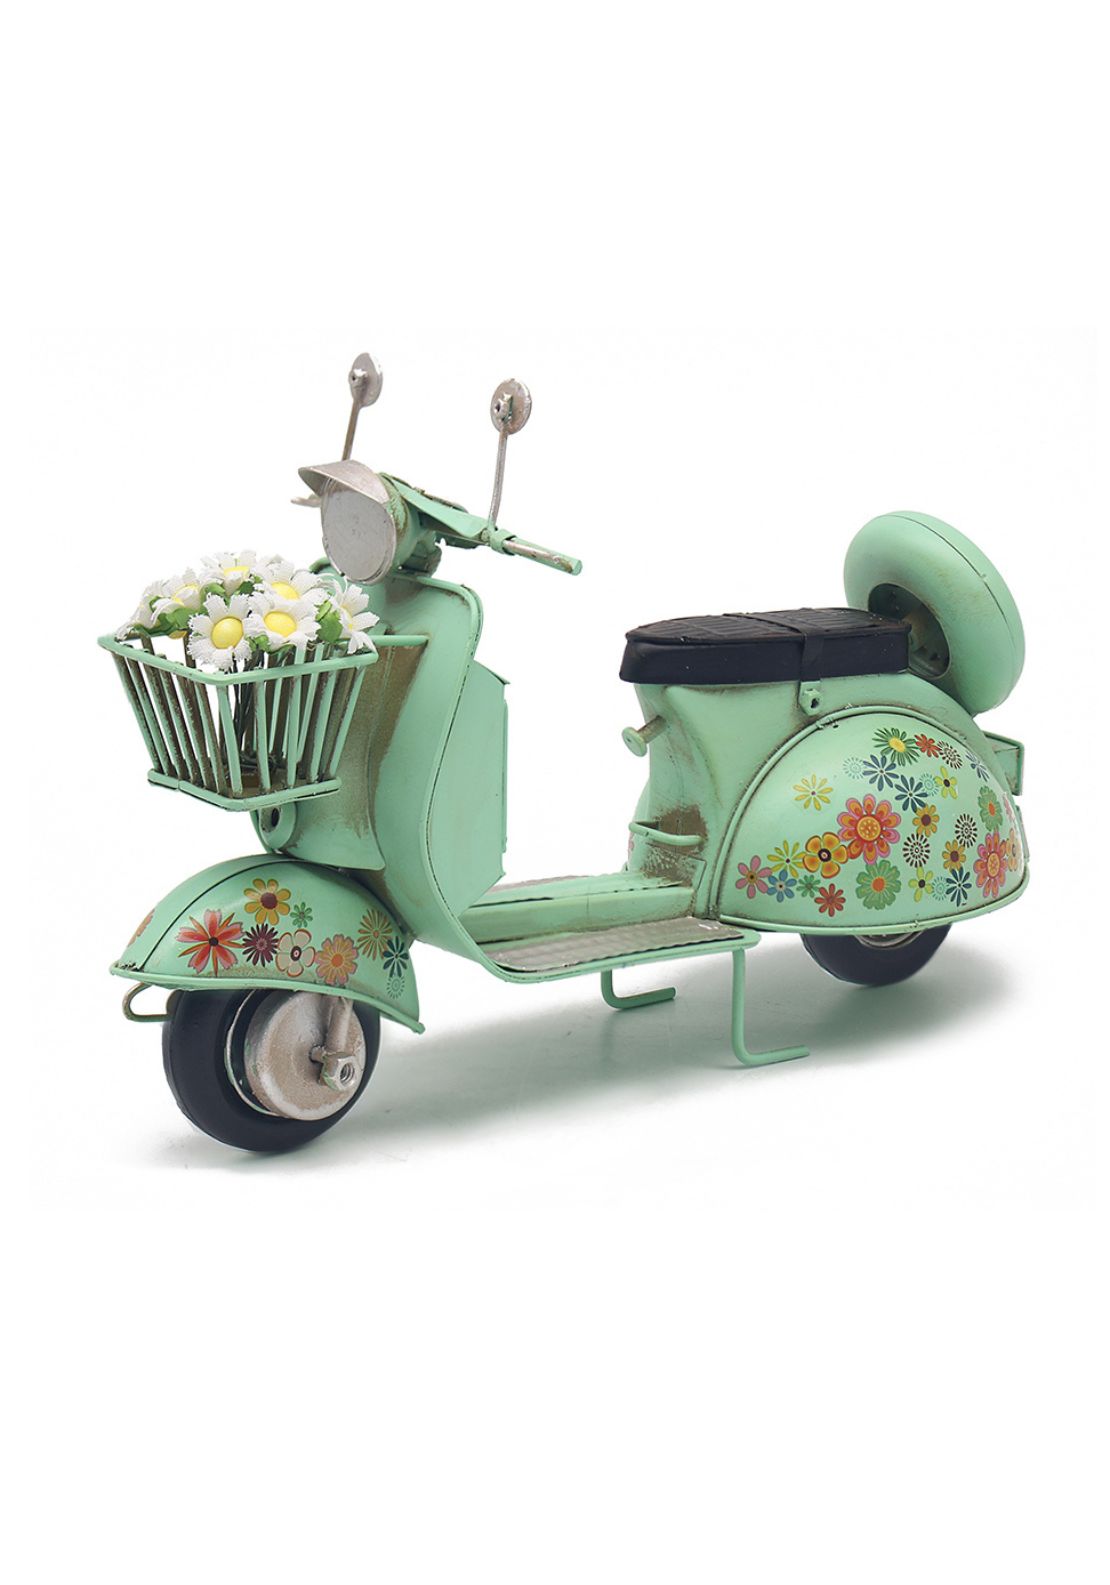 Tin Transport Vintage Scooter Floral - Green 1 Shaws Department Stores